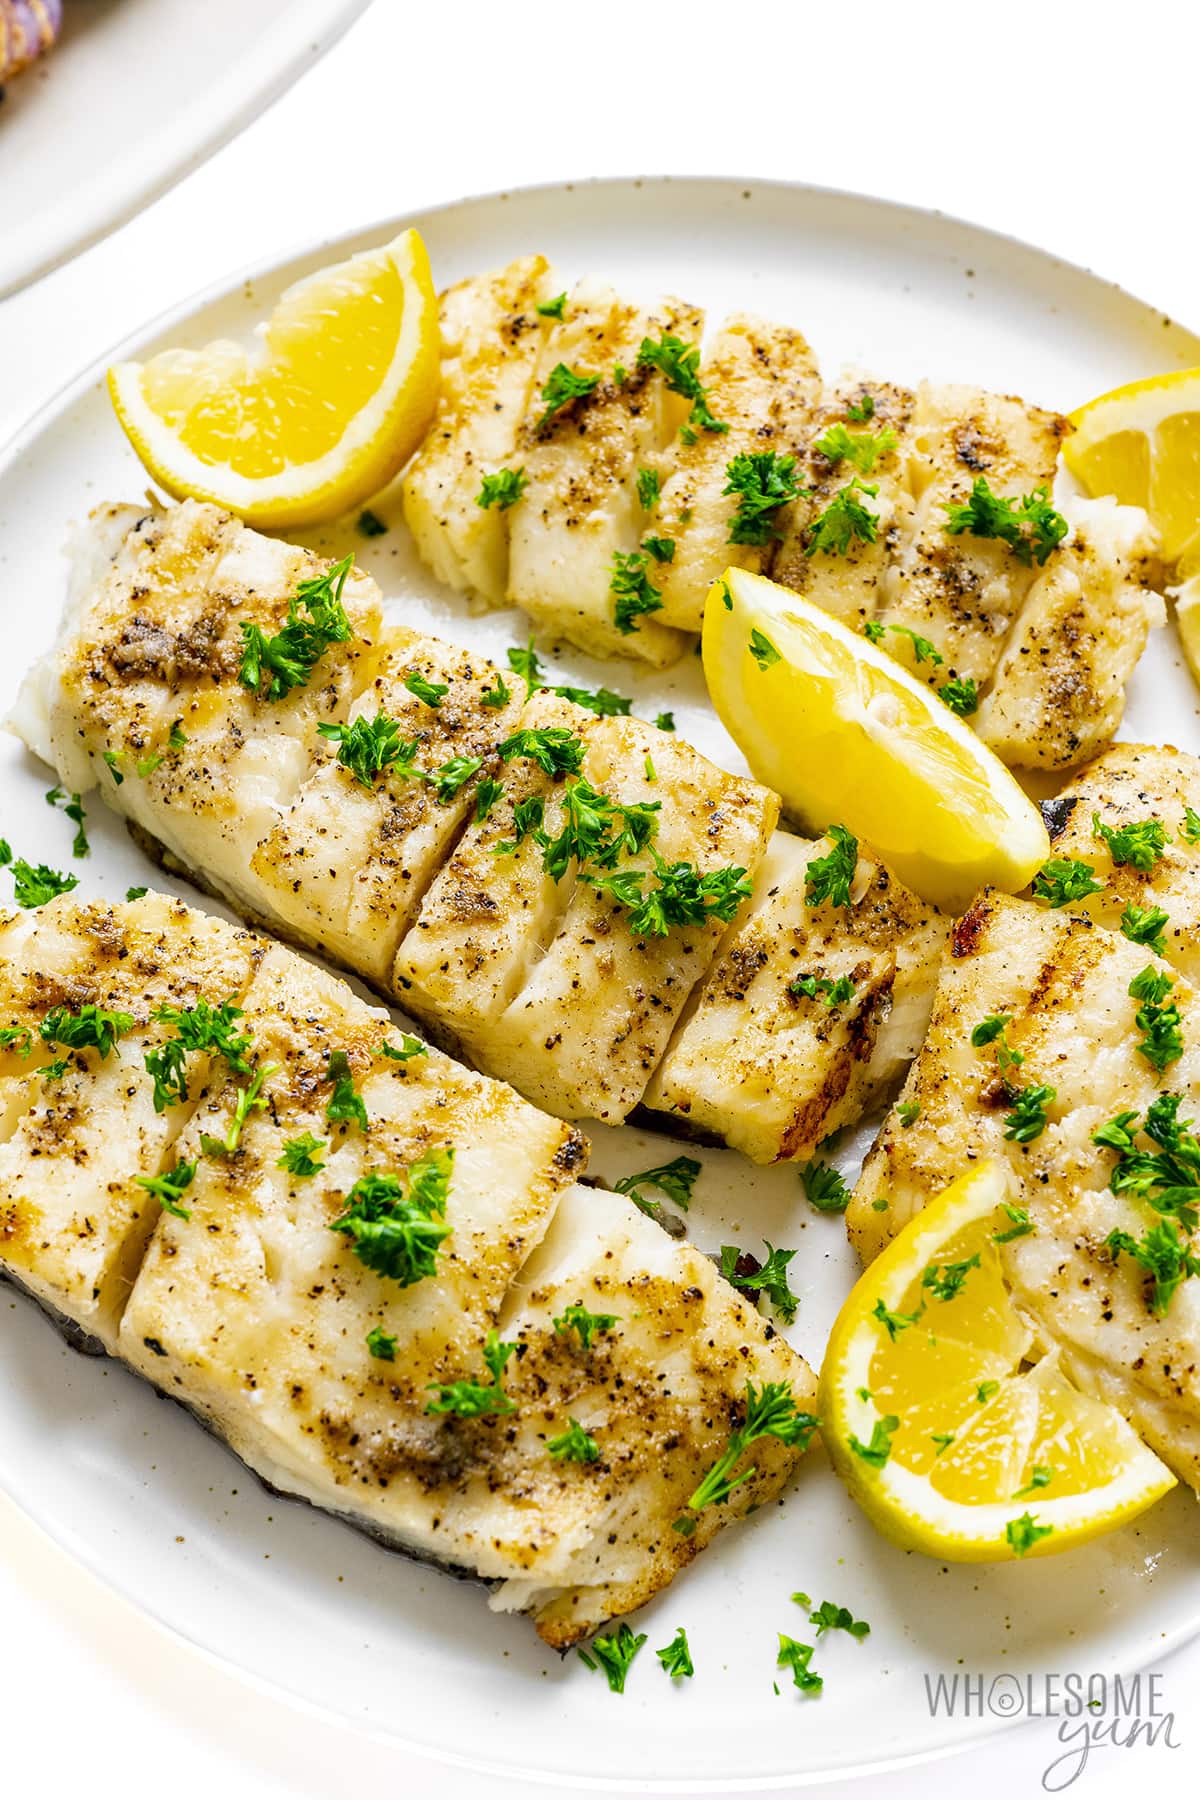 Grilled halibut on a plate with lemon wedges.